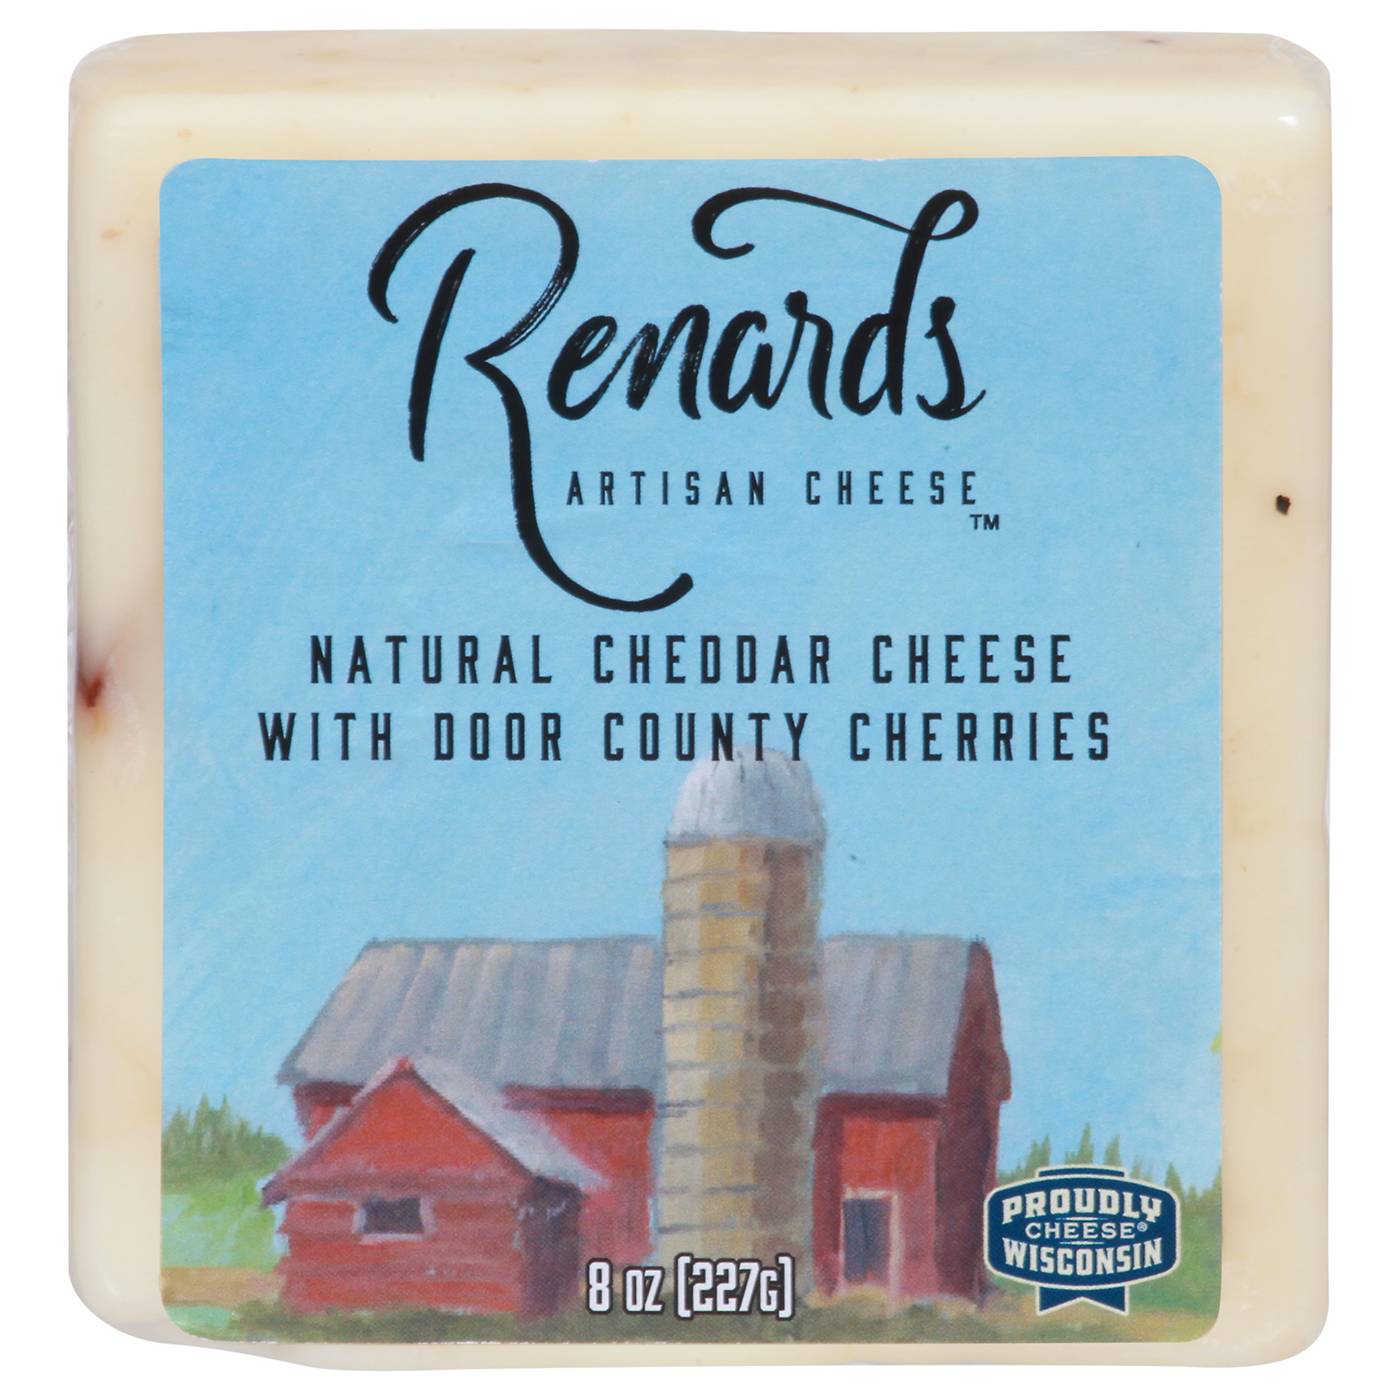 Renard's Artisan Cheese Natural Cheddar Cheese with Door County Cherries; image 1 of 3